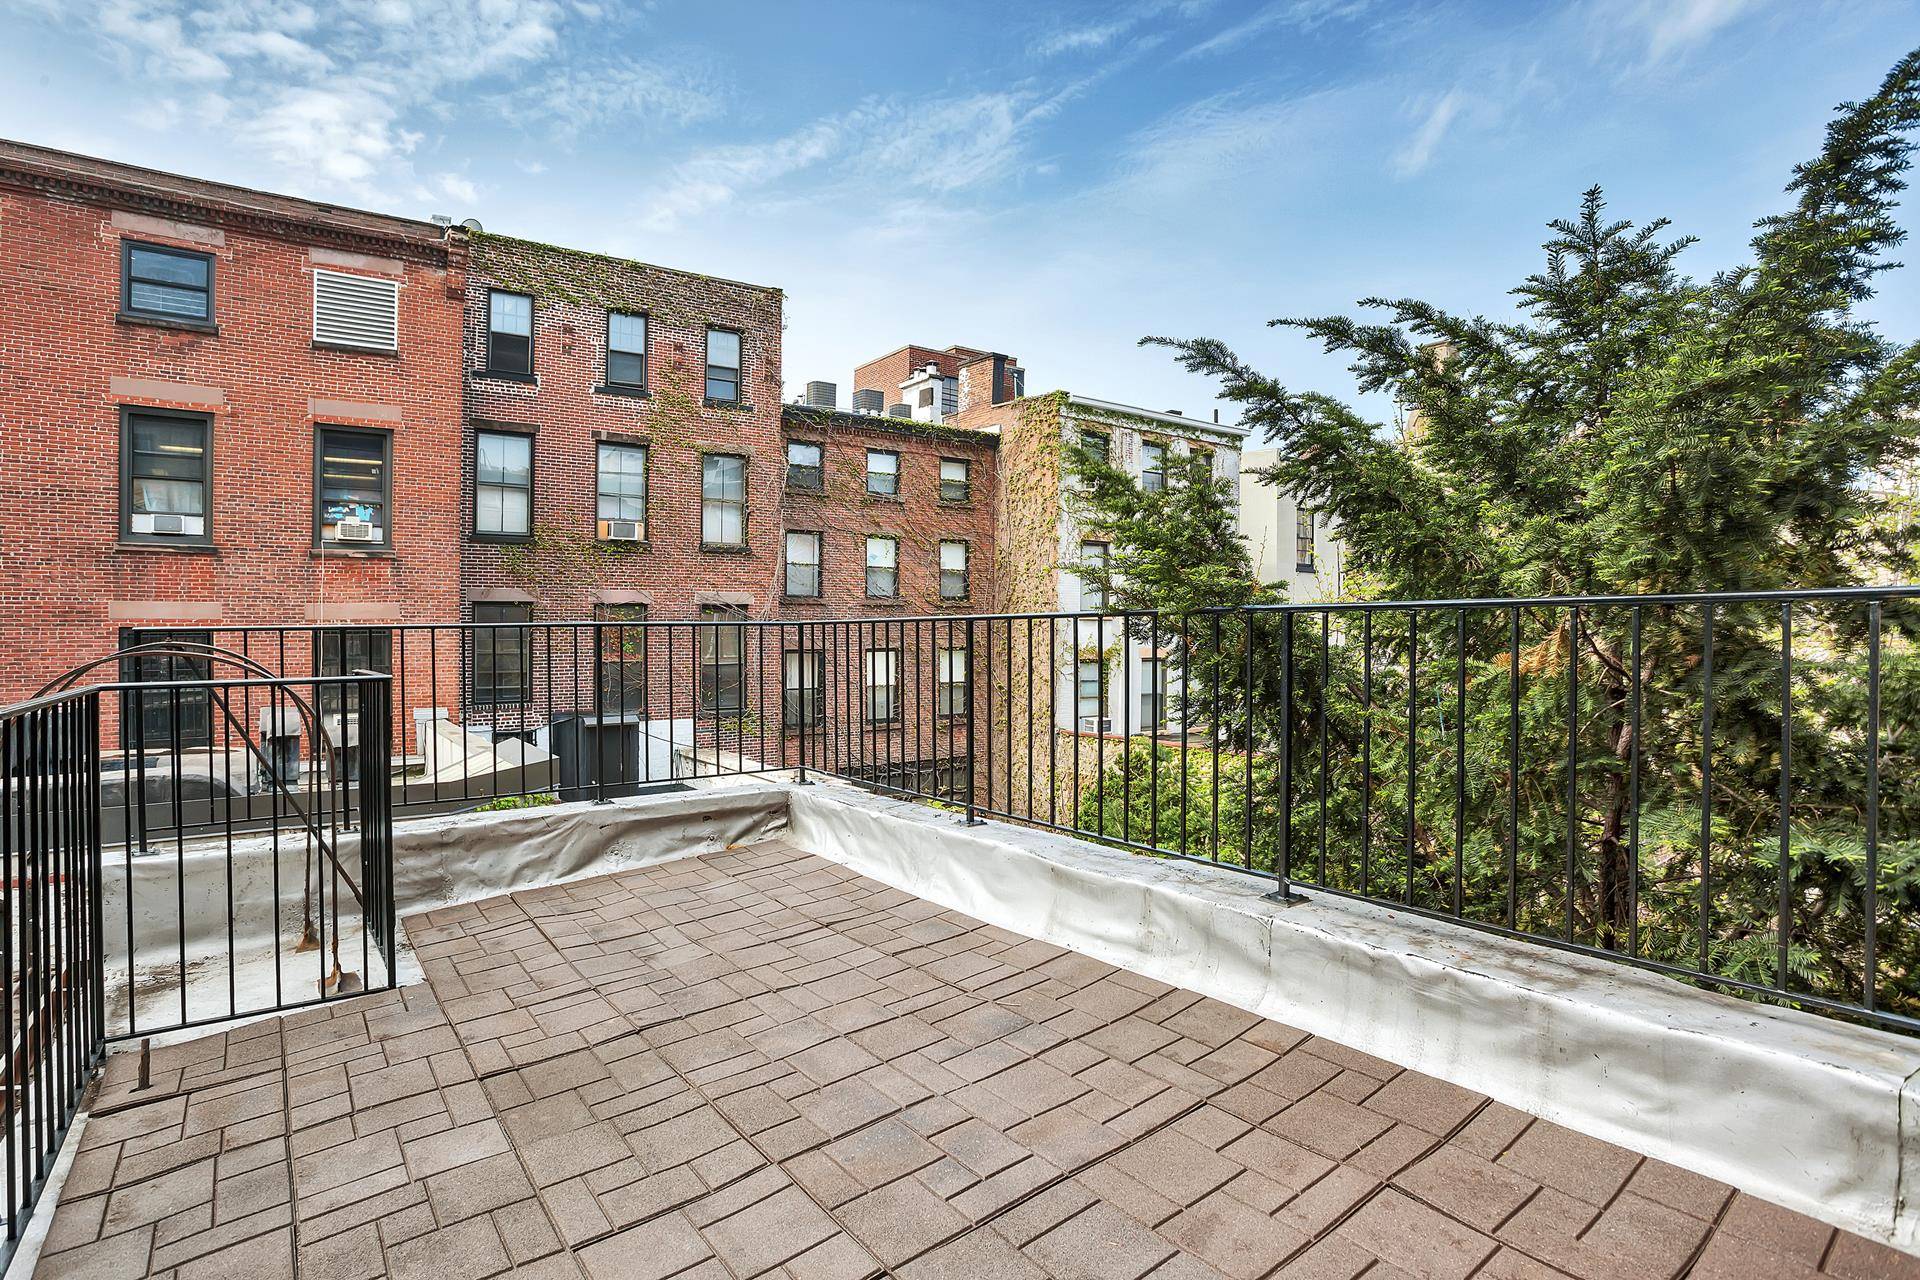 JUST LISTED ! Huge private outdoor patio amp ; in unit washer amp ; Dryer ; This amazing gut renovated 1 bedroom, 1 bathroom plus huge private patio apartment in ...